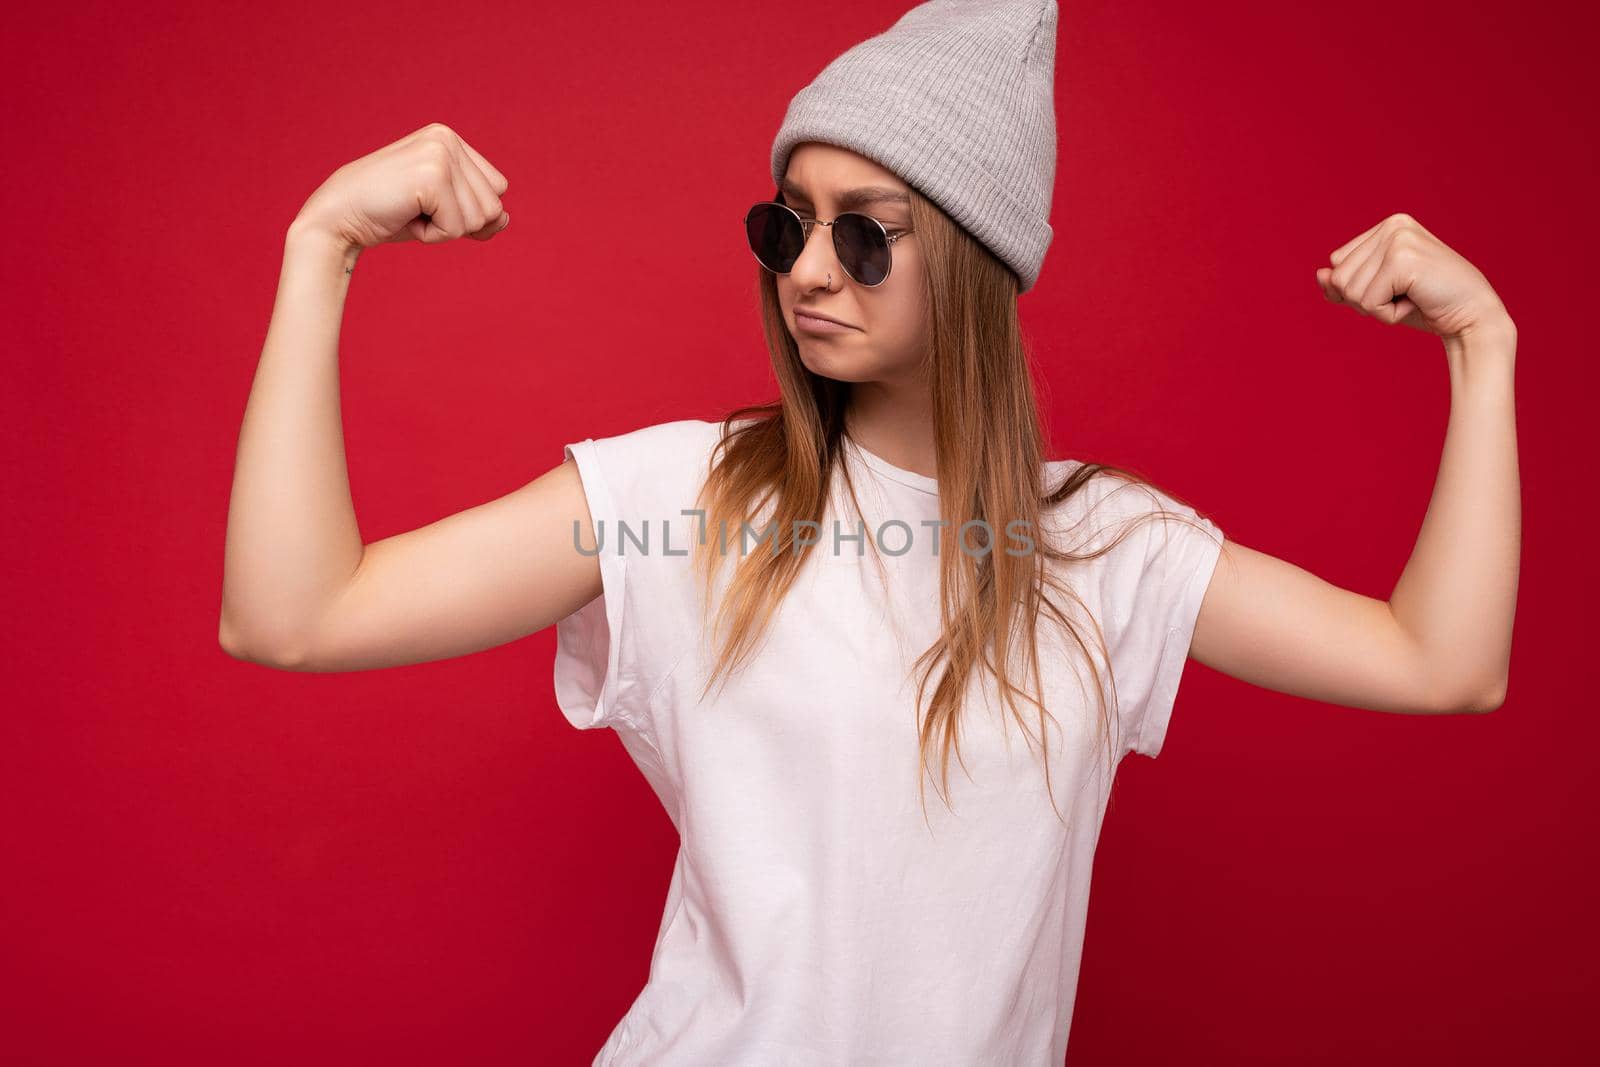 Portrait of young emotional positive funny beautiful dark blonde woman with sincere emotions wearing casual white t-shirt with empty space for mockup gray hat and sunglasses isolated over red background with free space. Female model showing powerful muscles and biceps. Fitness and workout concept.